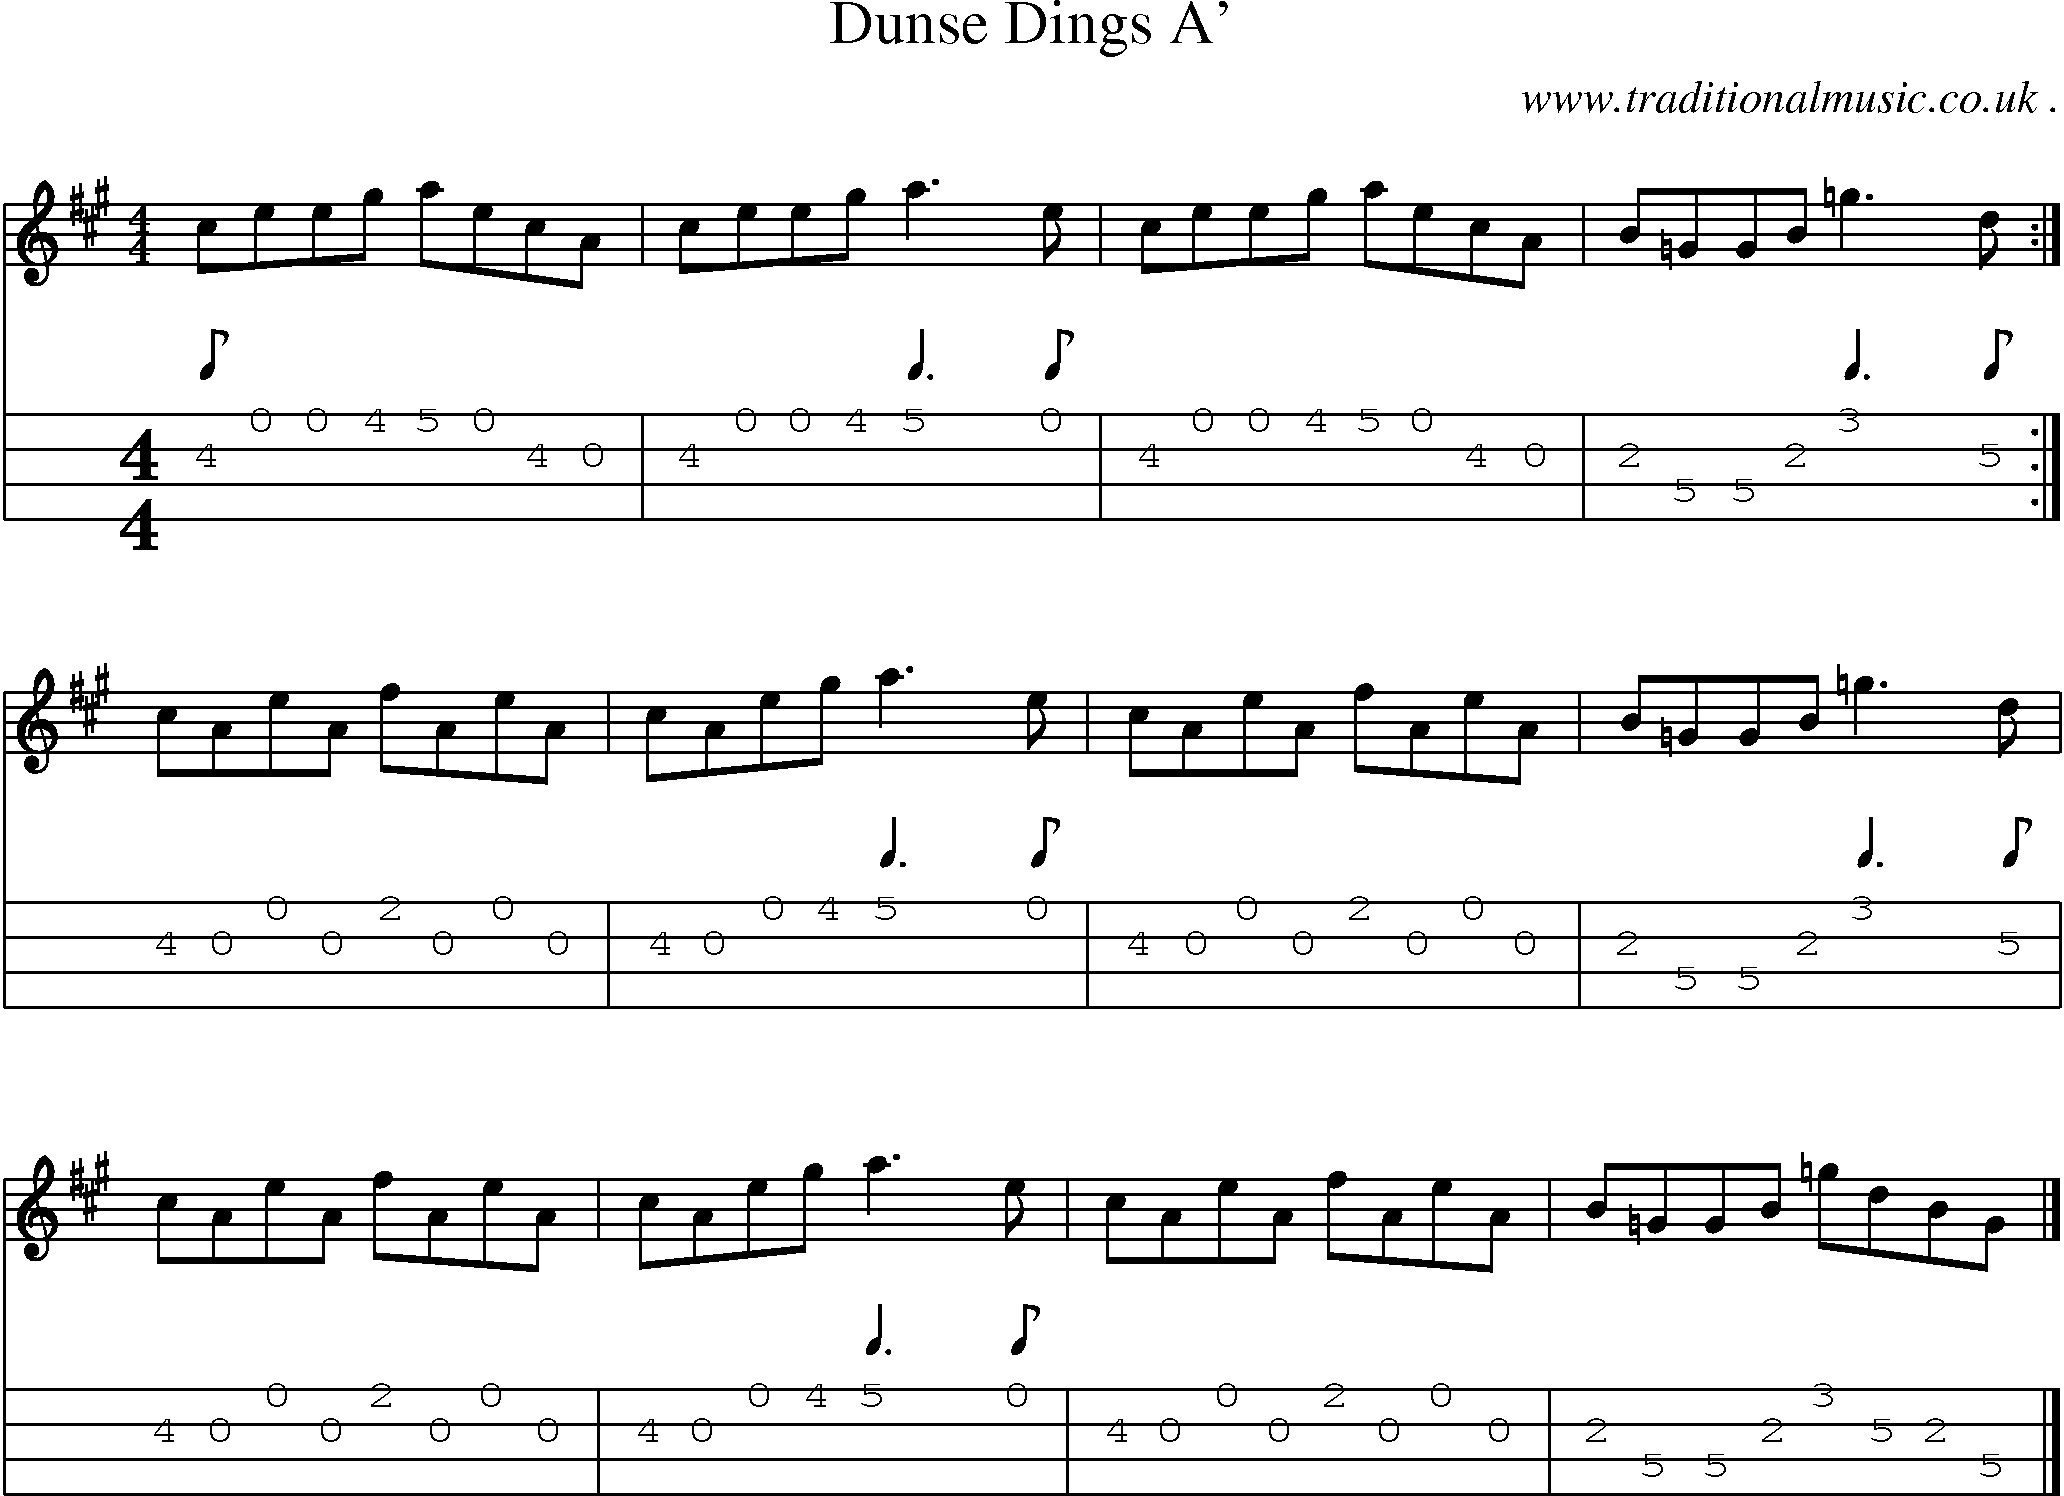 Sheet-music  score, Chords and Mandolin Tabs for Dunse Dings A